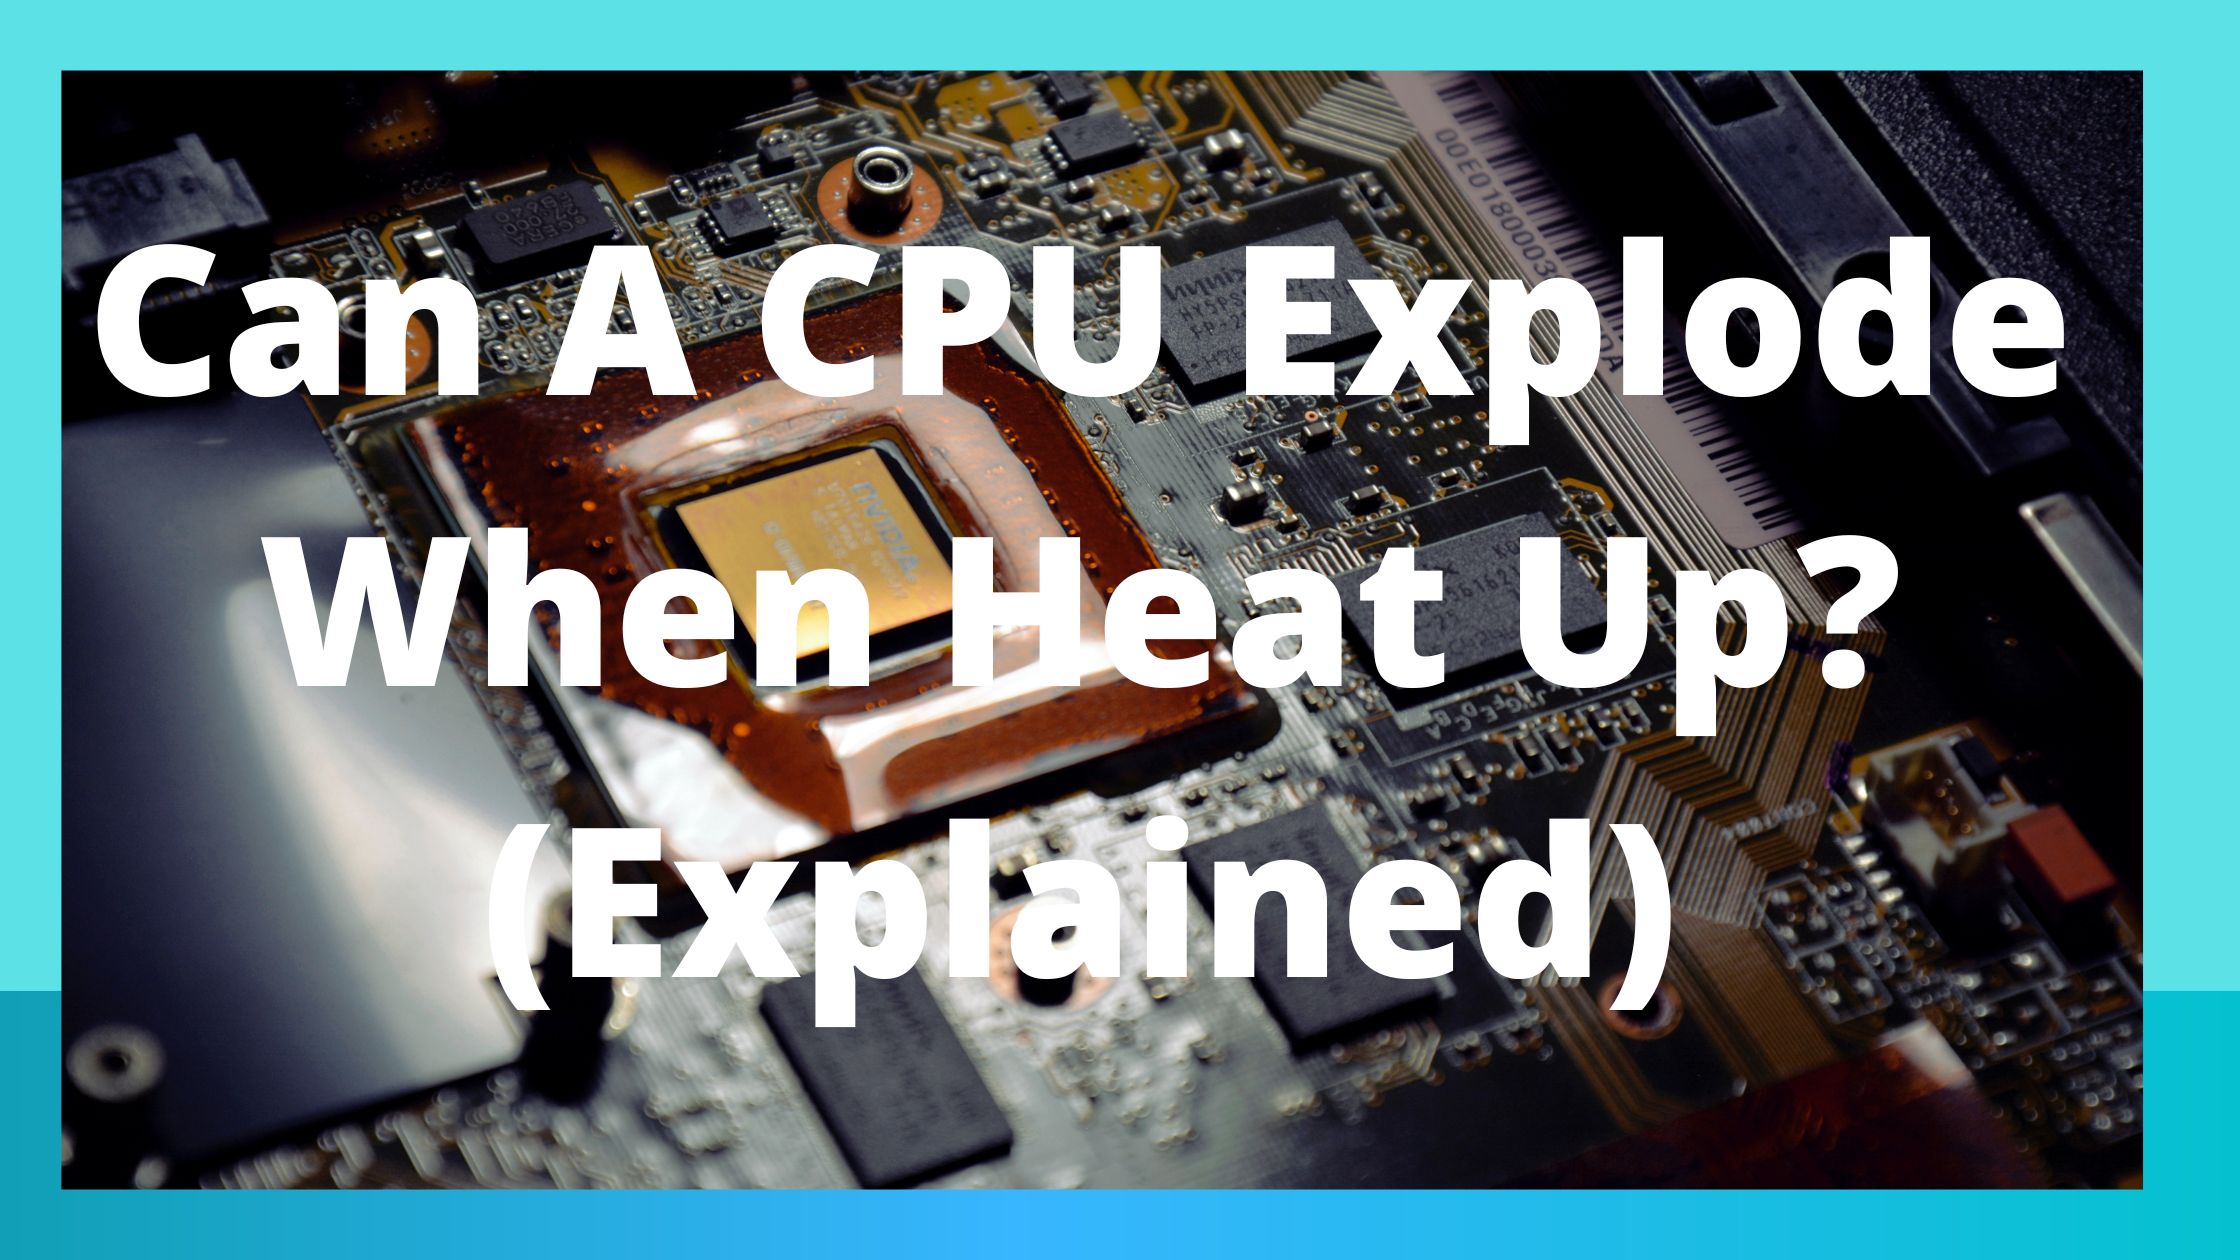 Can A CPU Explode when heat up(Explained)